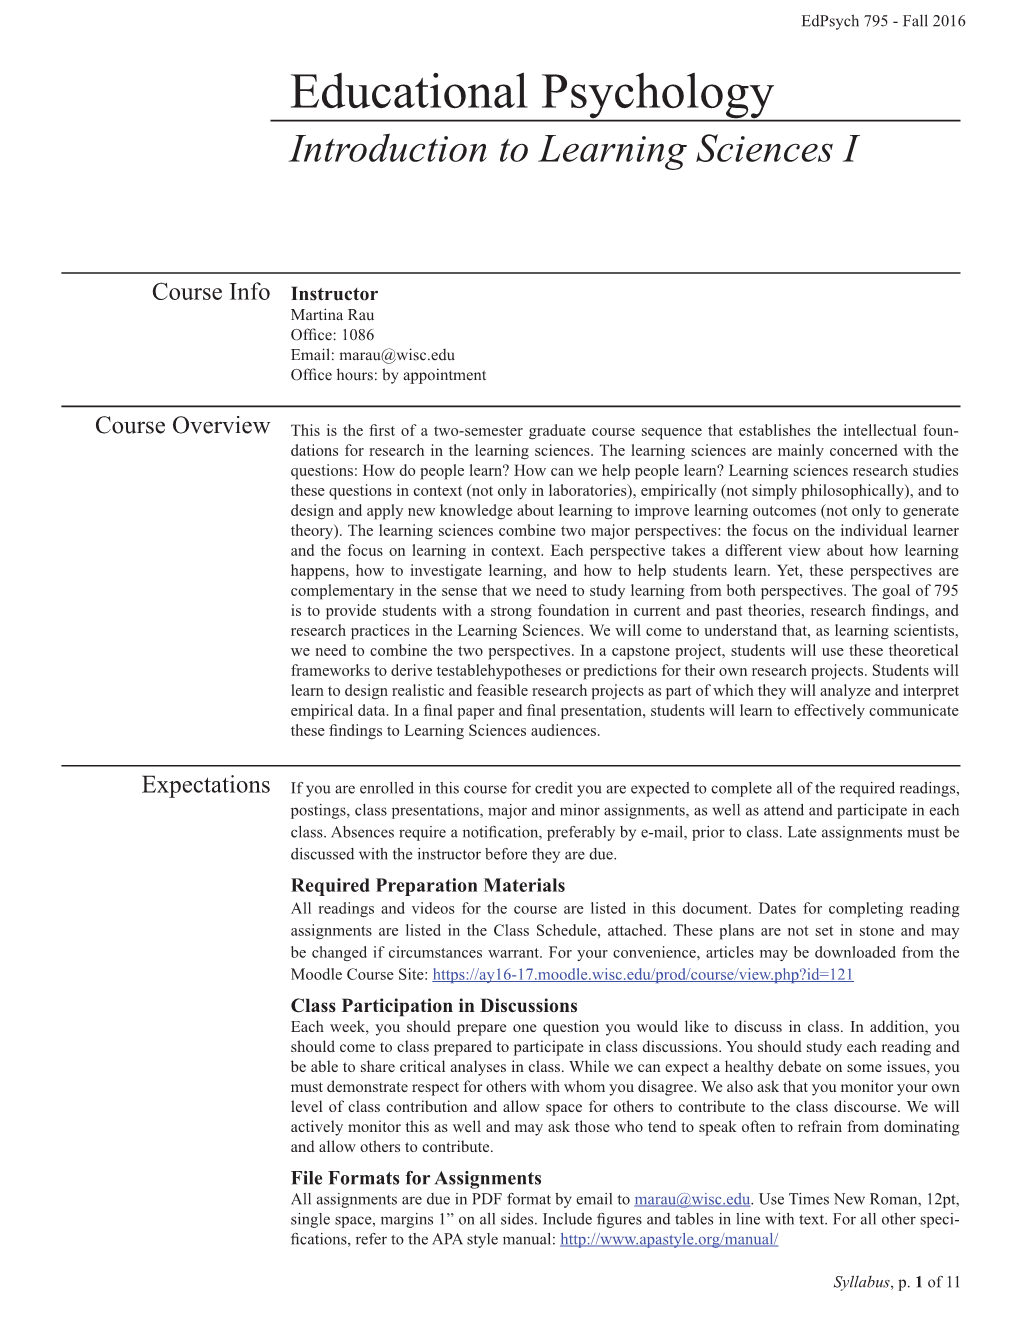 Educational Psychology Introduction to Learning Sciences I